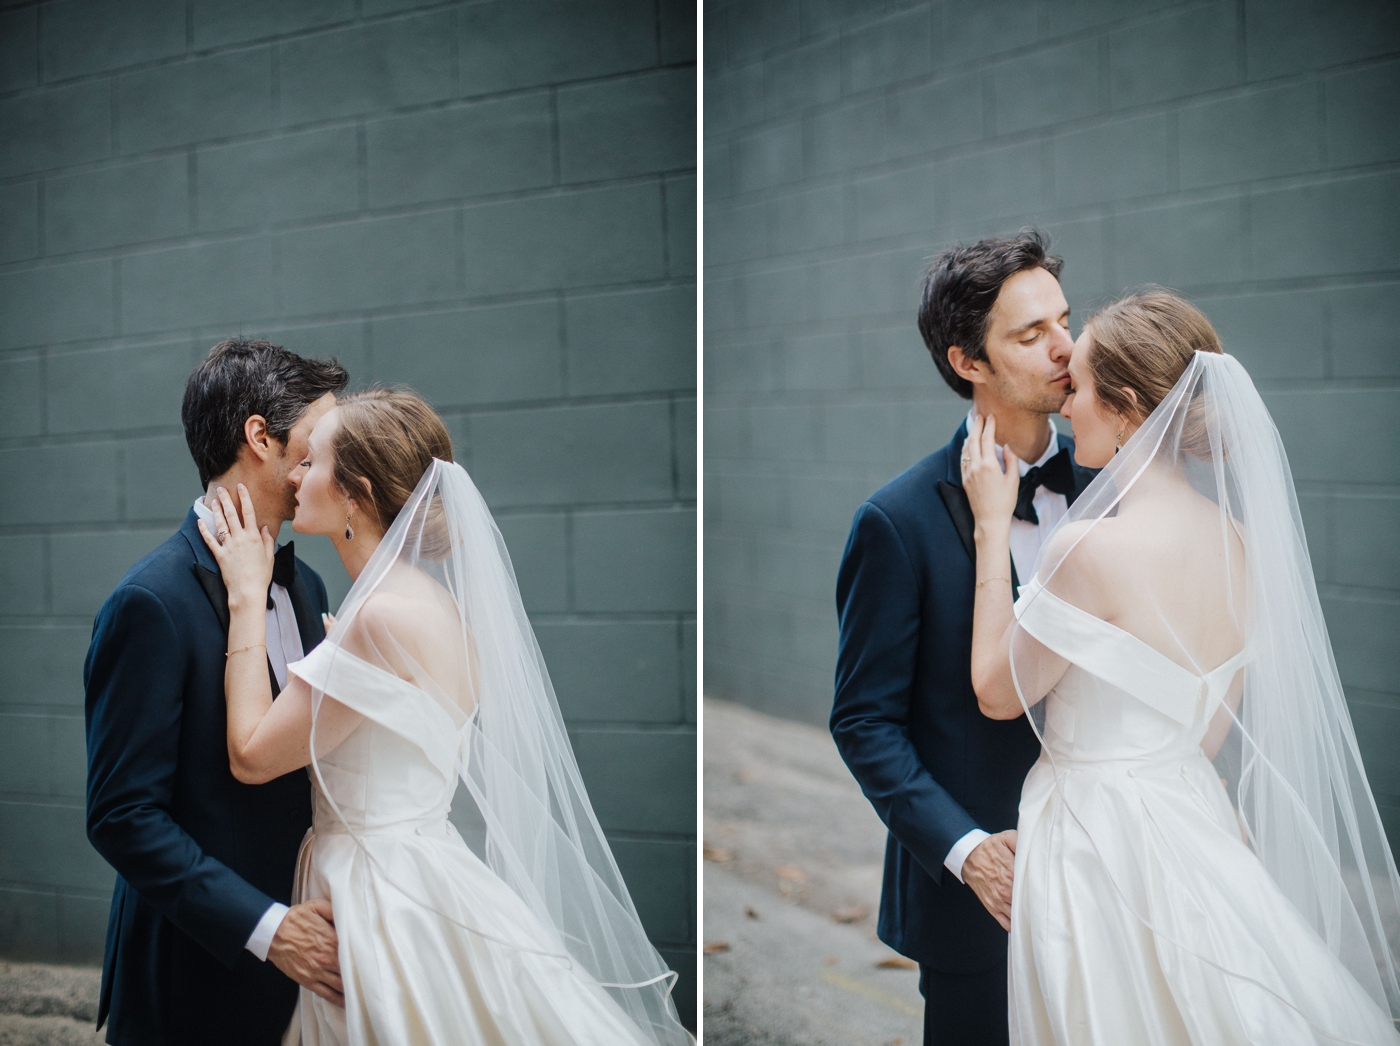 Classic black and white Savannah Wedding | Izzy and Co.